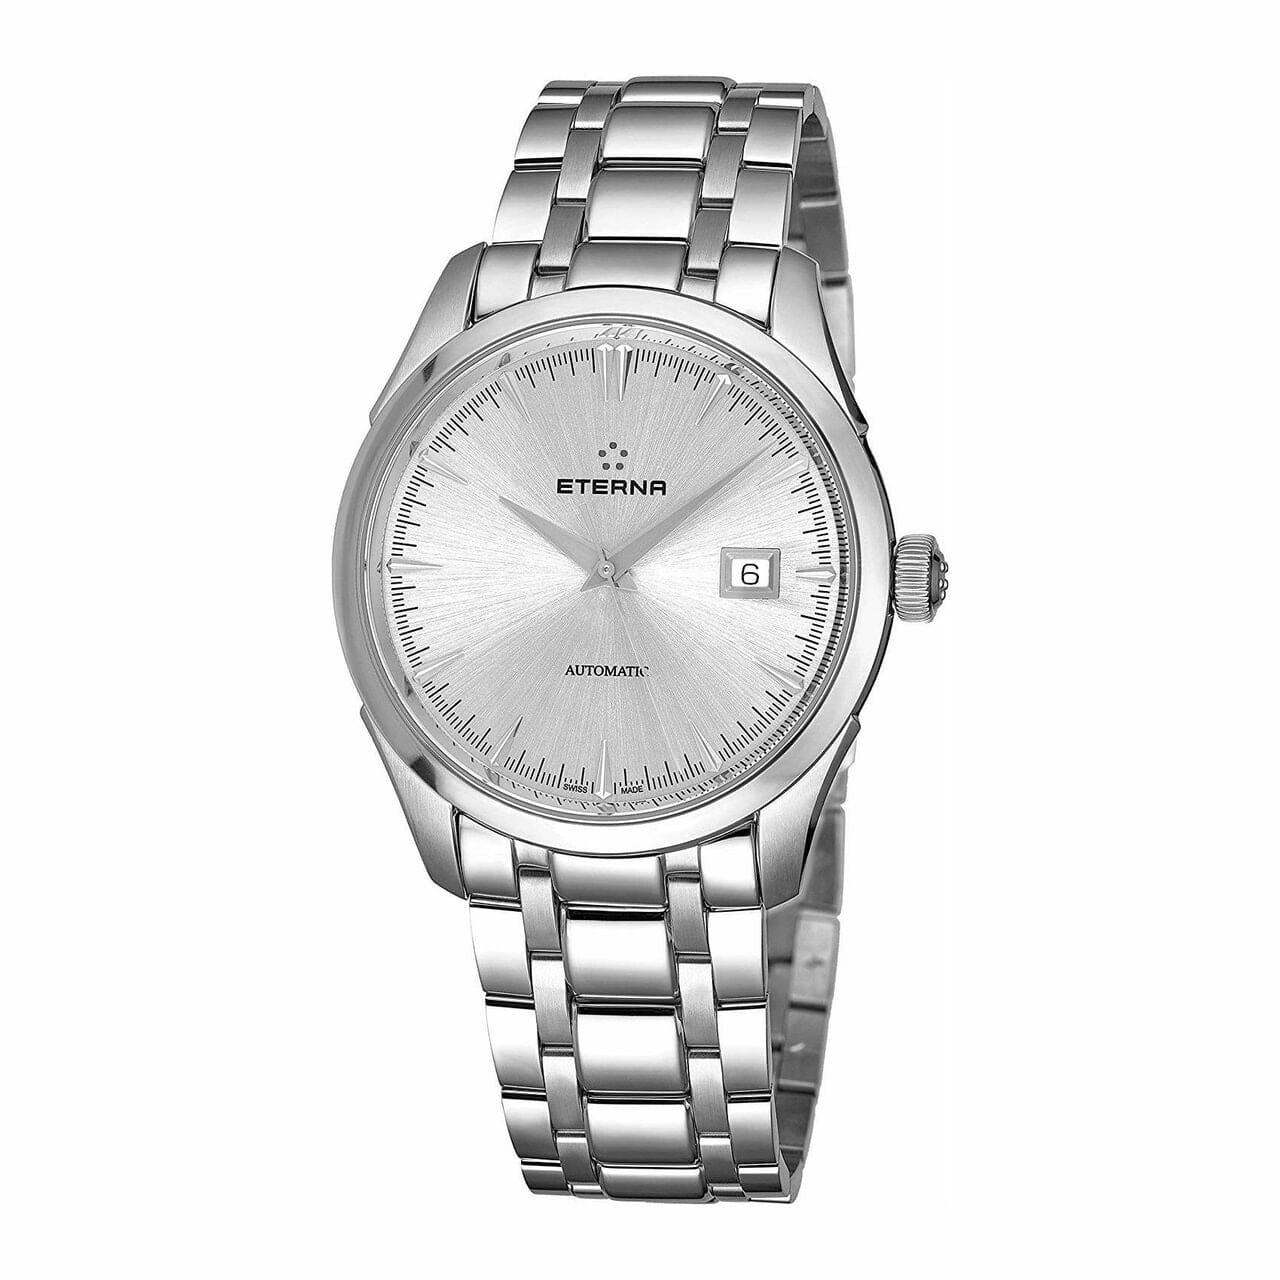 Eterna 2951.41.10.1700 Eternity Stainless Steel Silver Dial Men's Automatic Watch 7640157016832